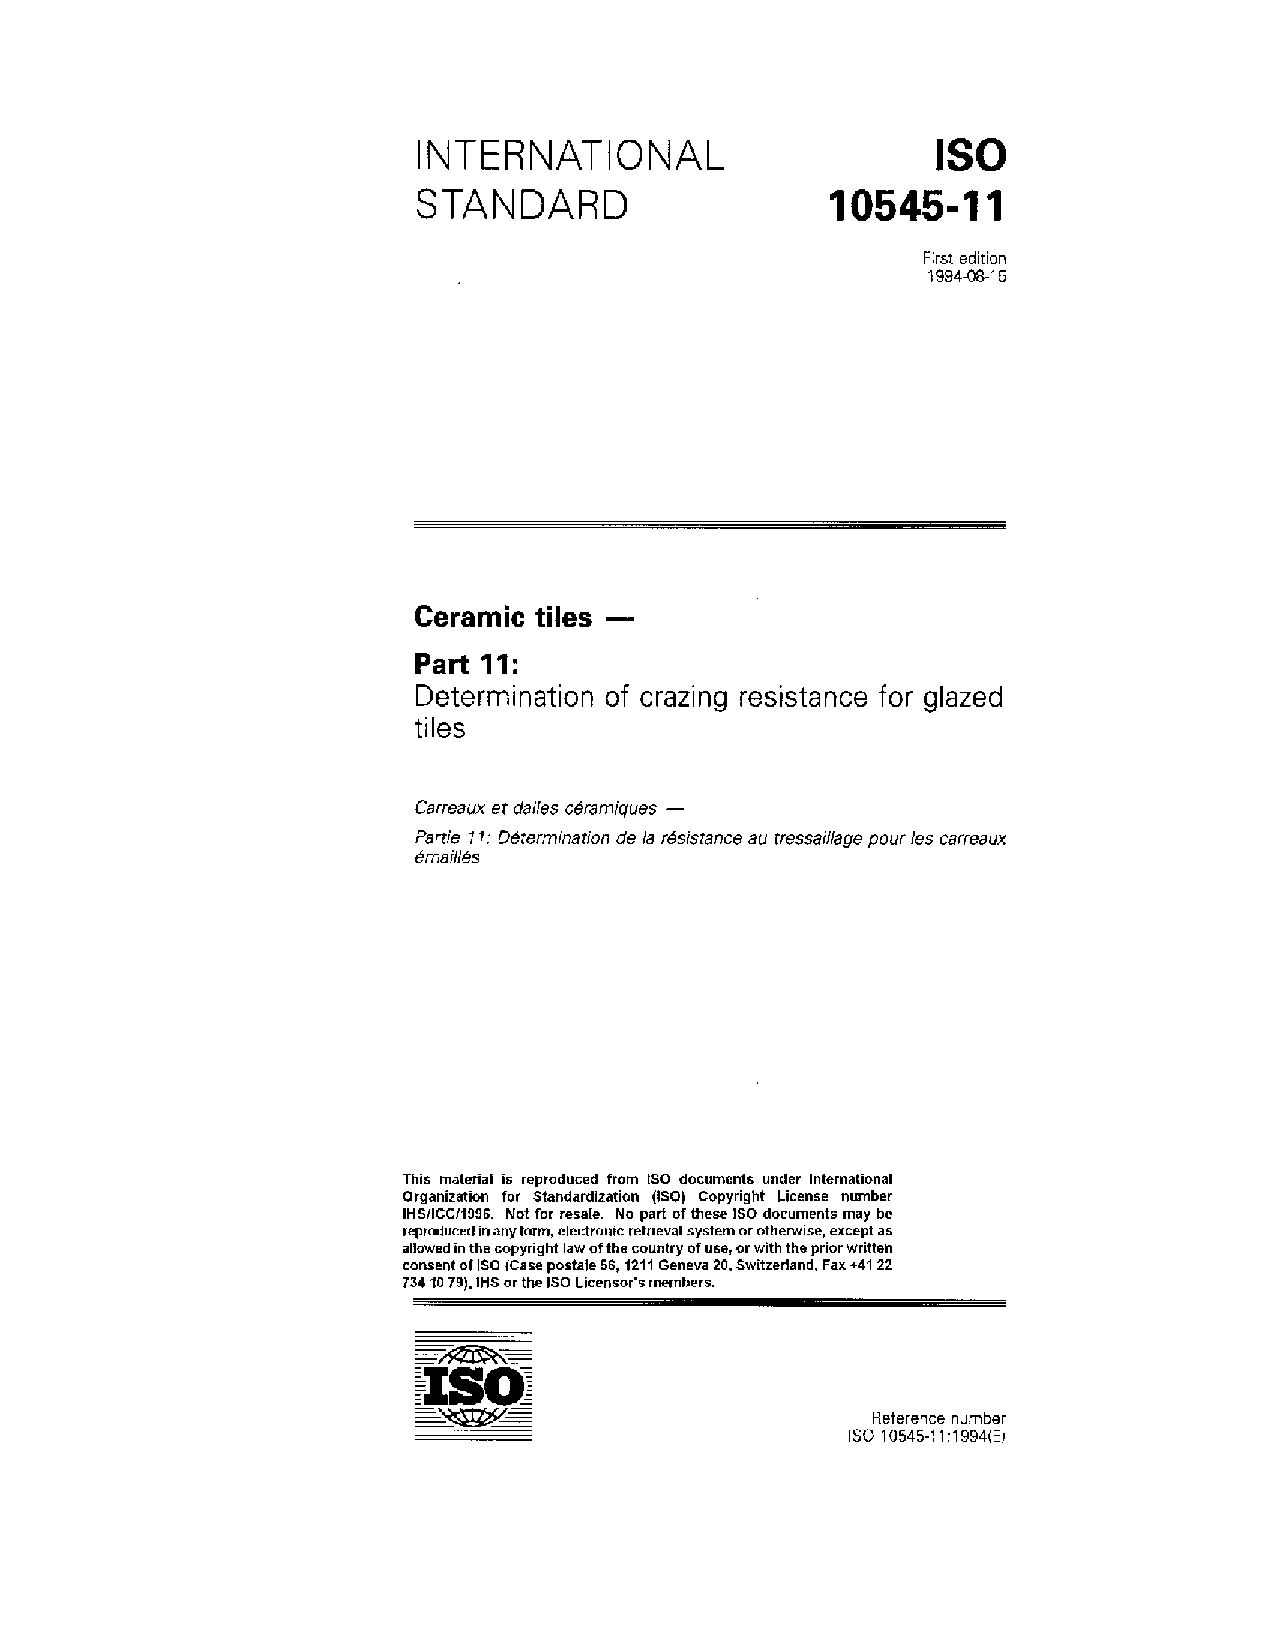 ISO 10545-11:1994